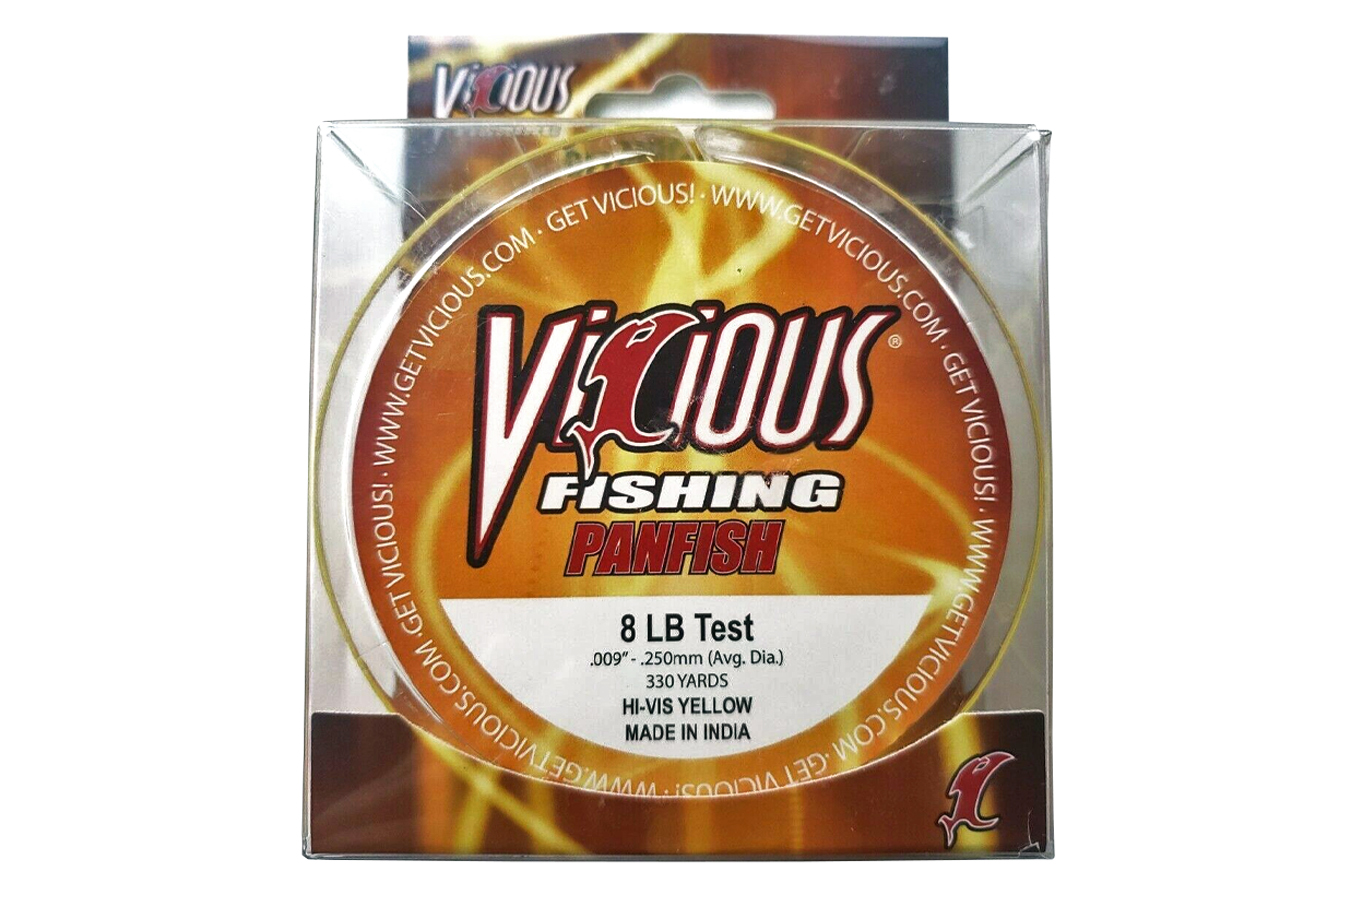 Discount Vicious Panfish Fishing Line, 330 Yards, 8 lb, Hi-Vis Yellow for  Sale, Online Fishing Store